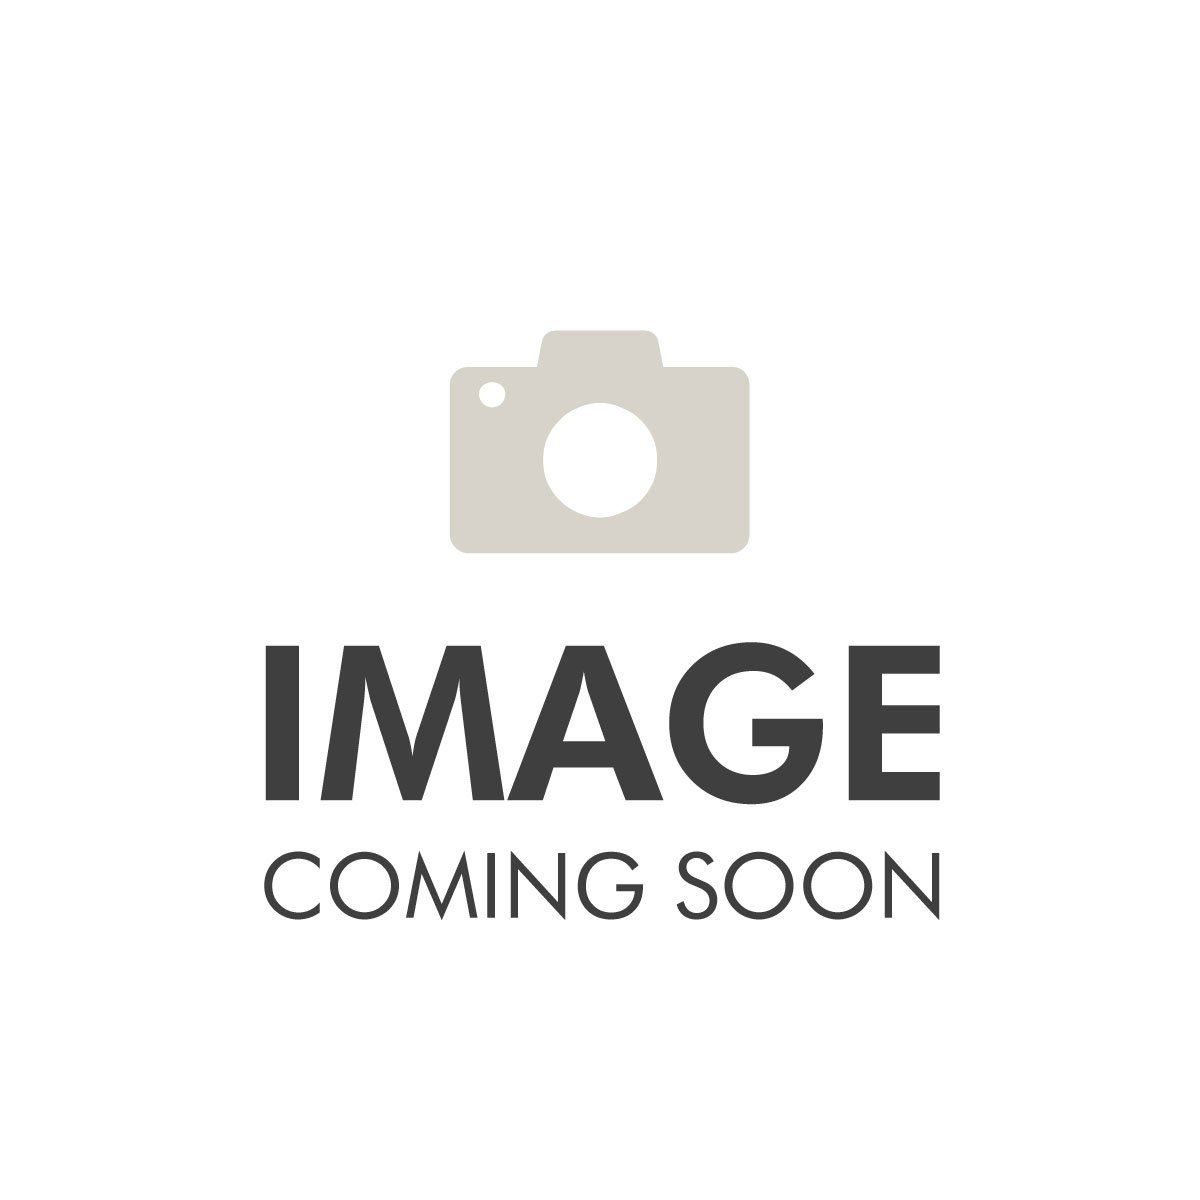 A picture of a camera with the words `` image coming soon ''.